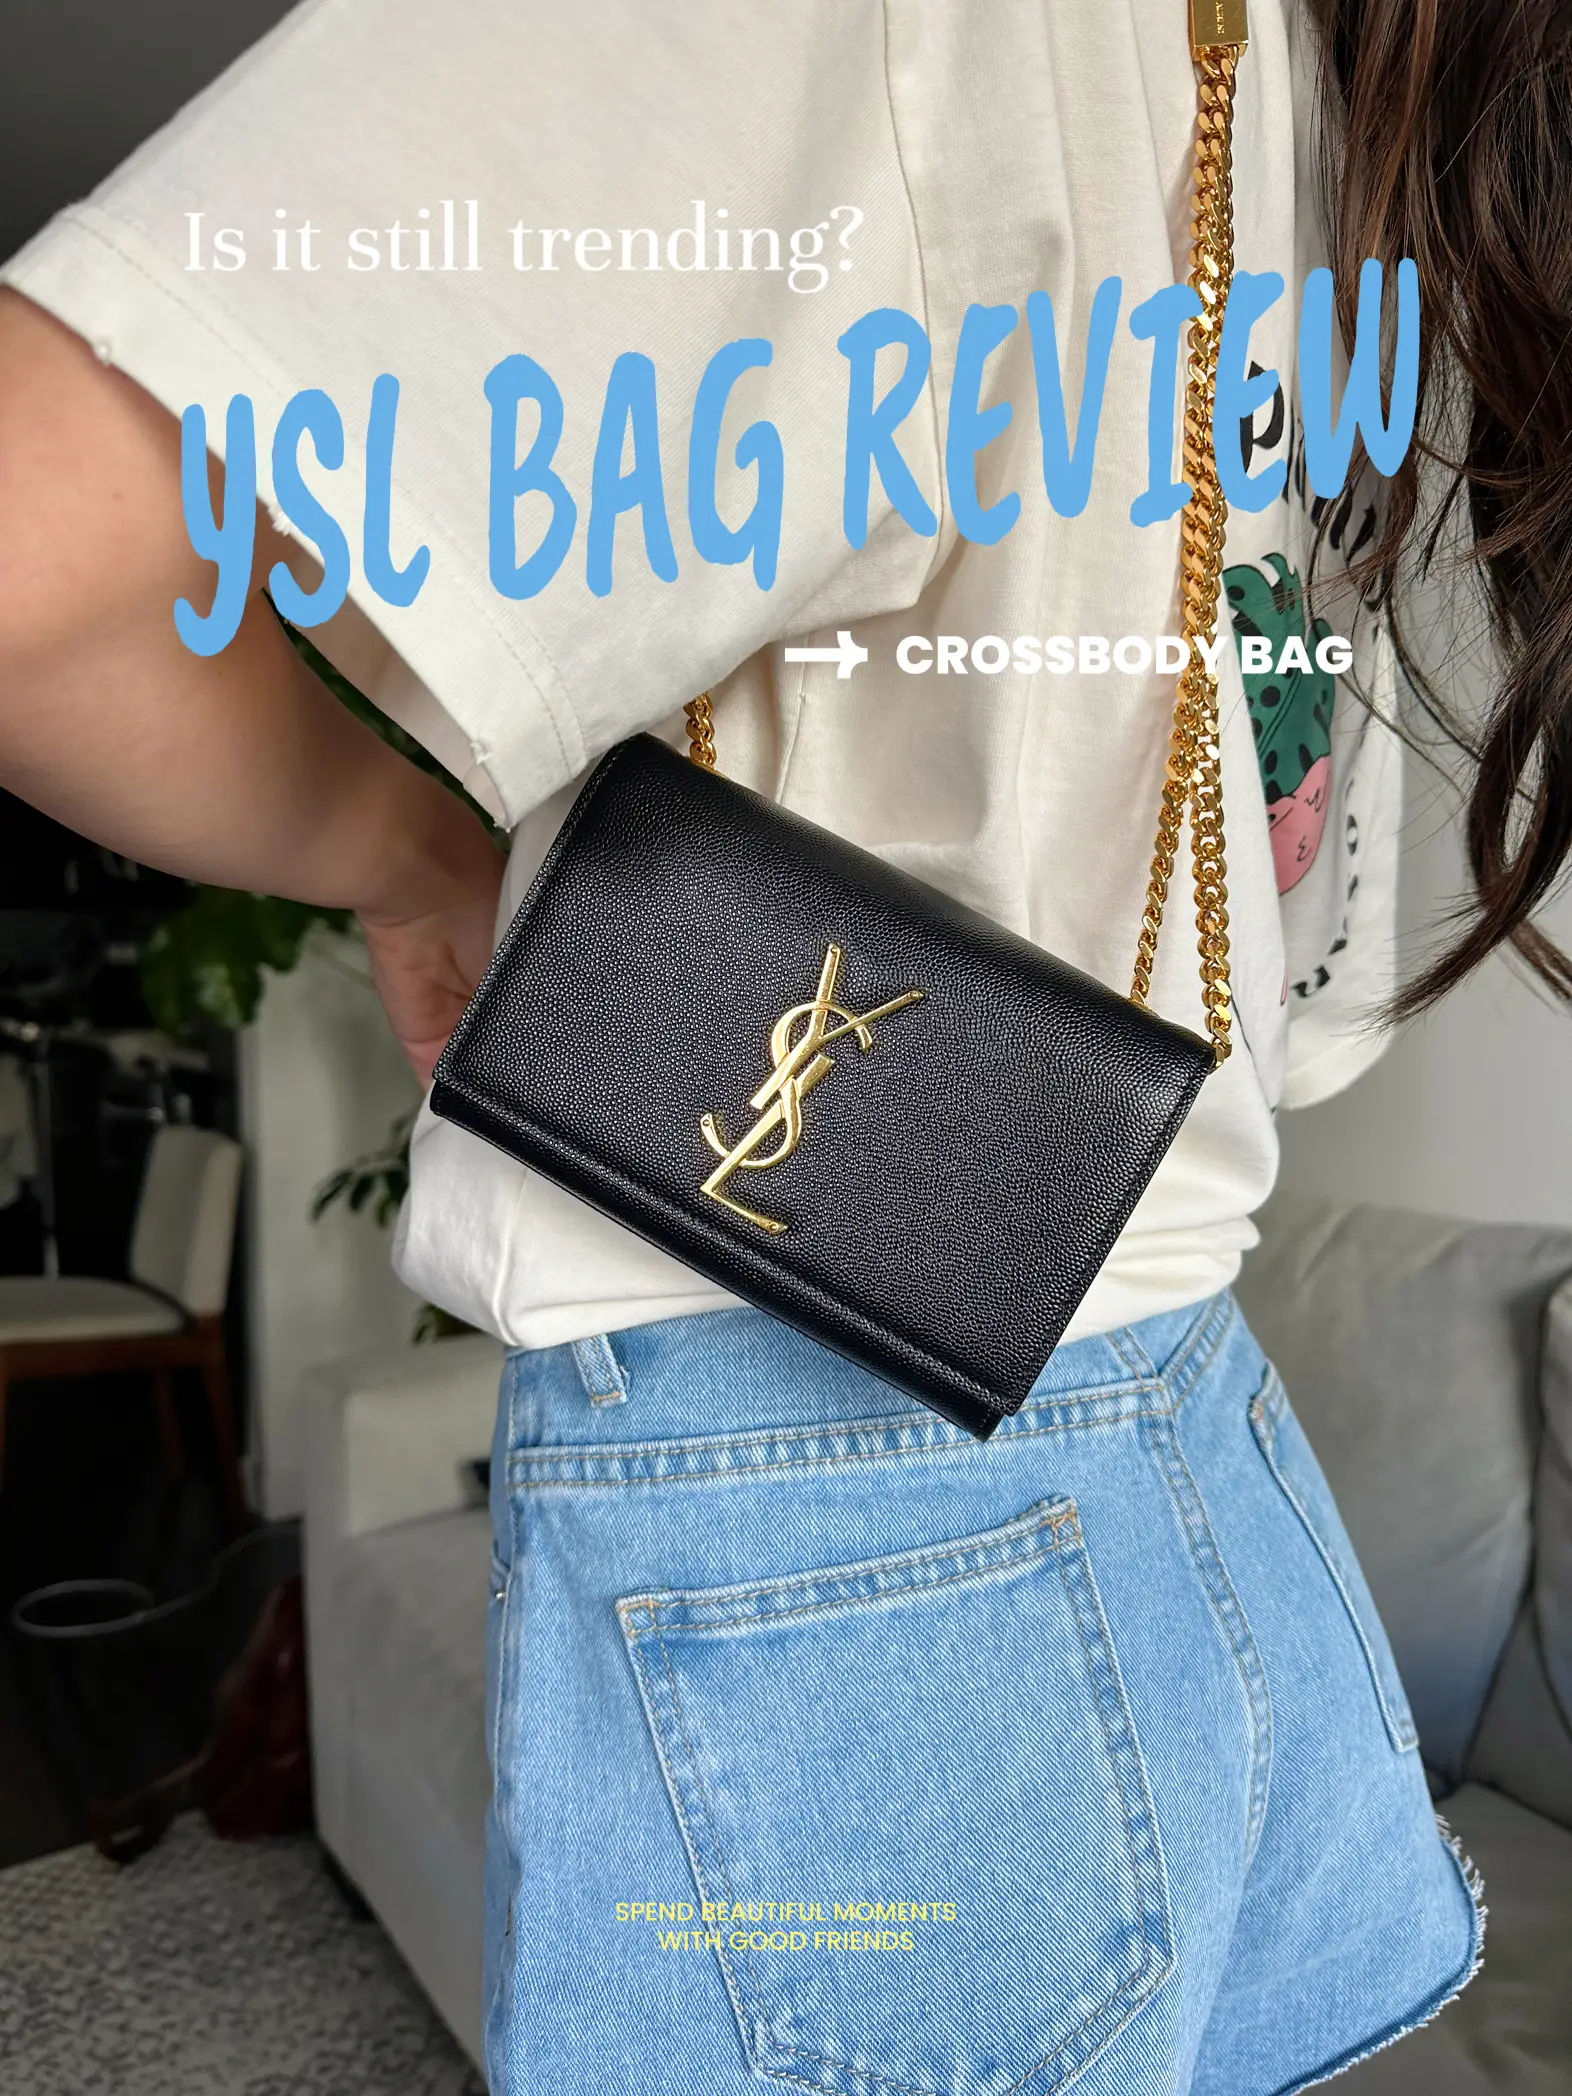 2 most AFFORDABLE & TIMELESS YSL BAGS comparison